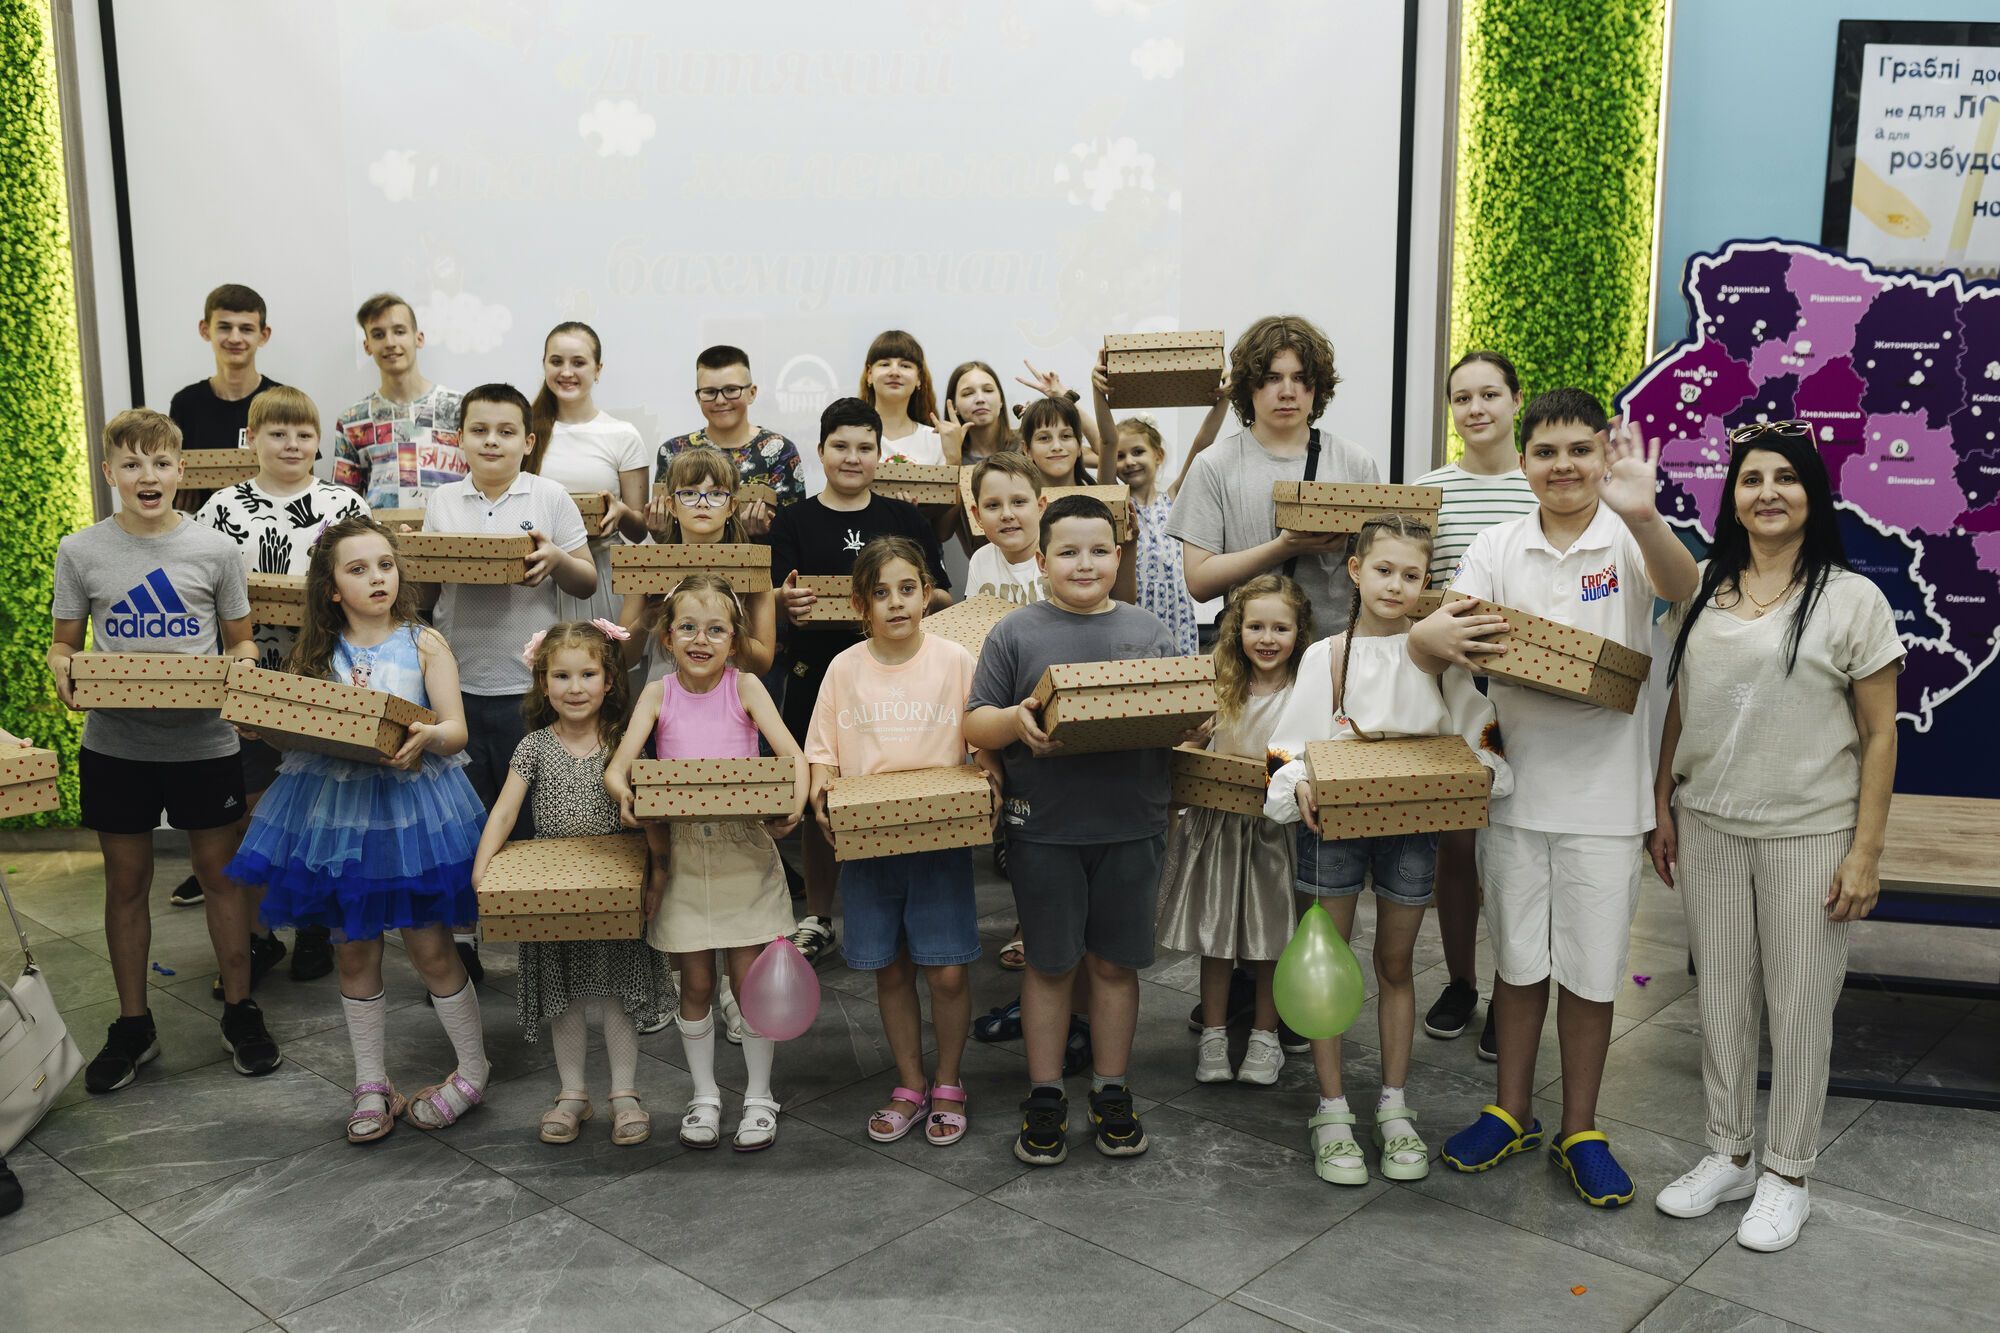 A holiday for children was organized in the Bakhmutyan Center with the support of Rustam Dzhambulatov